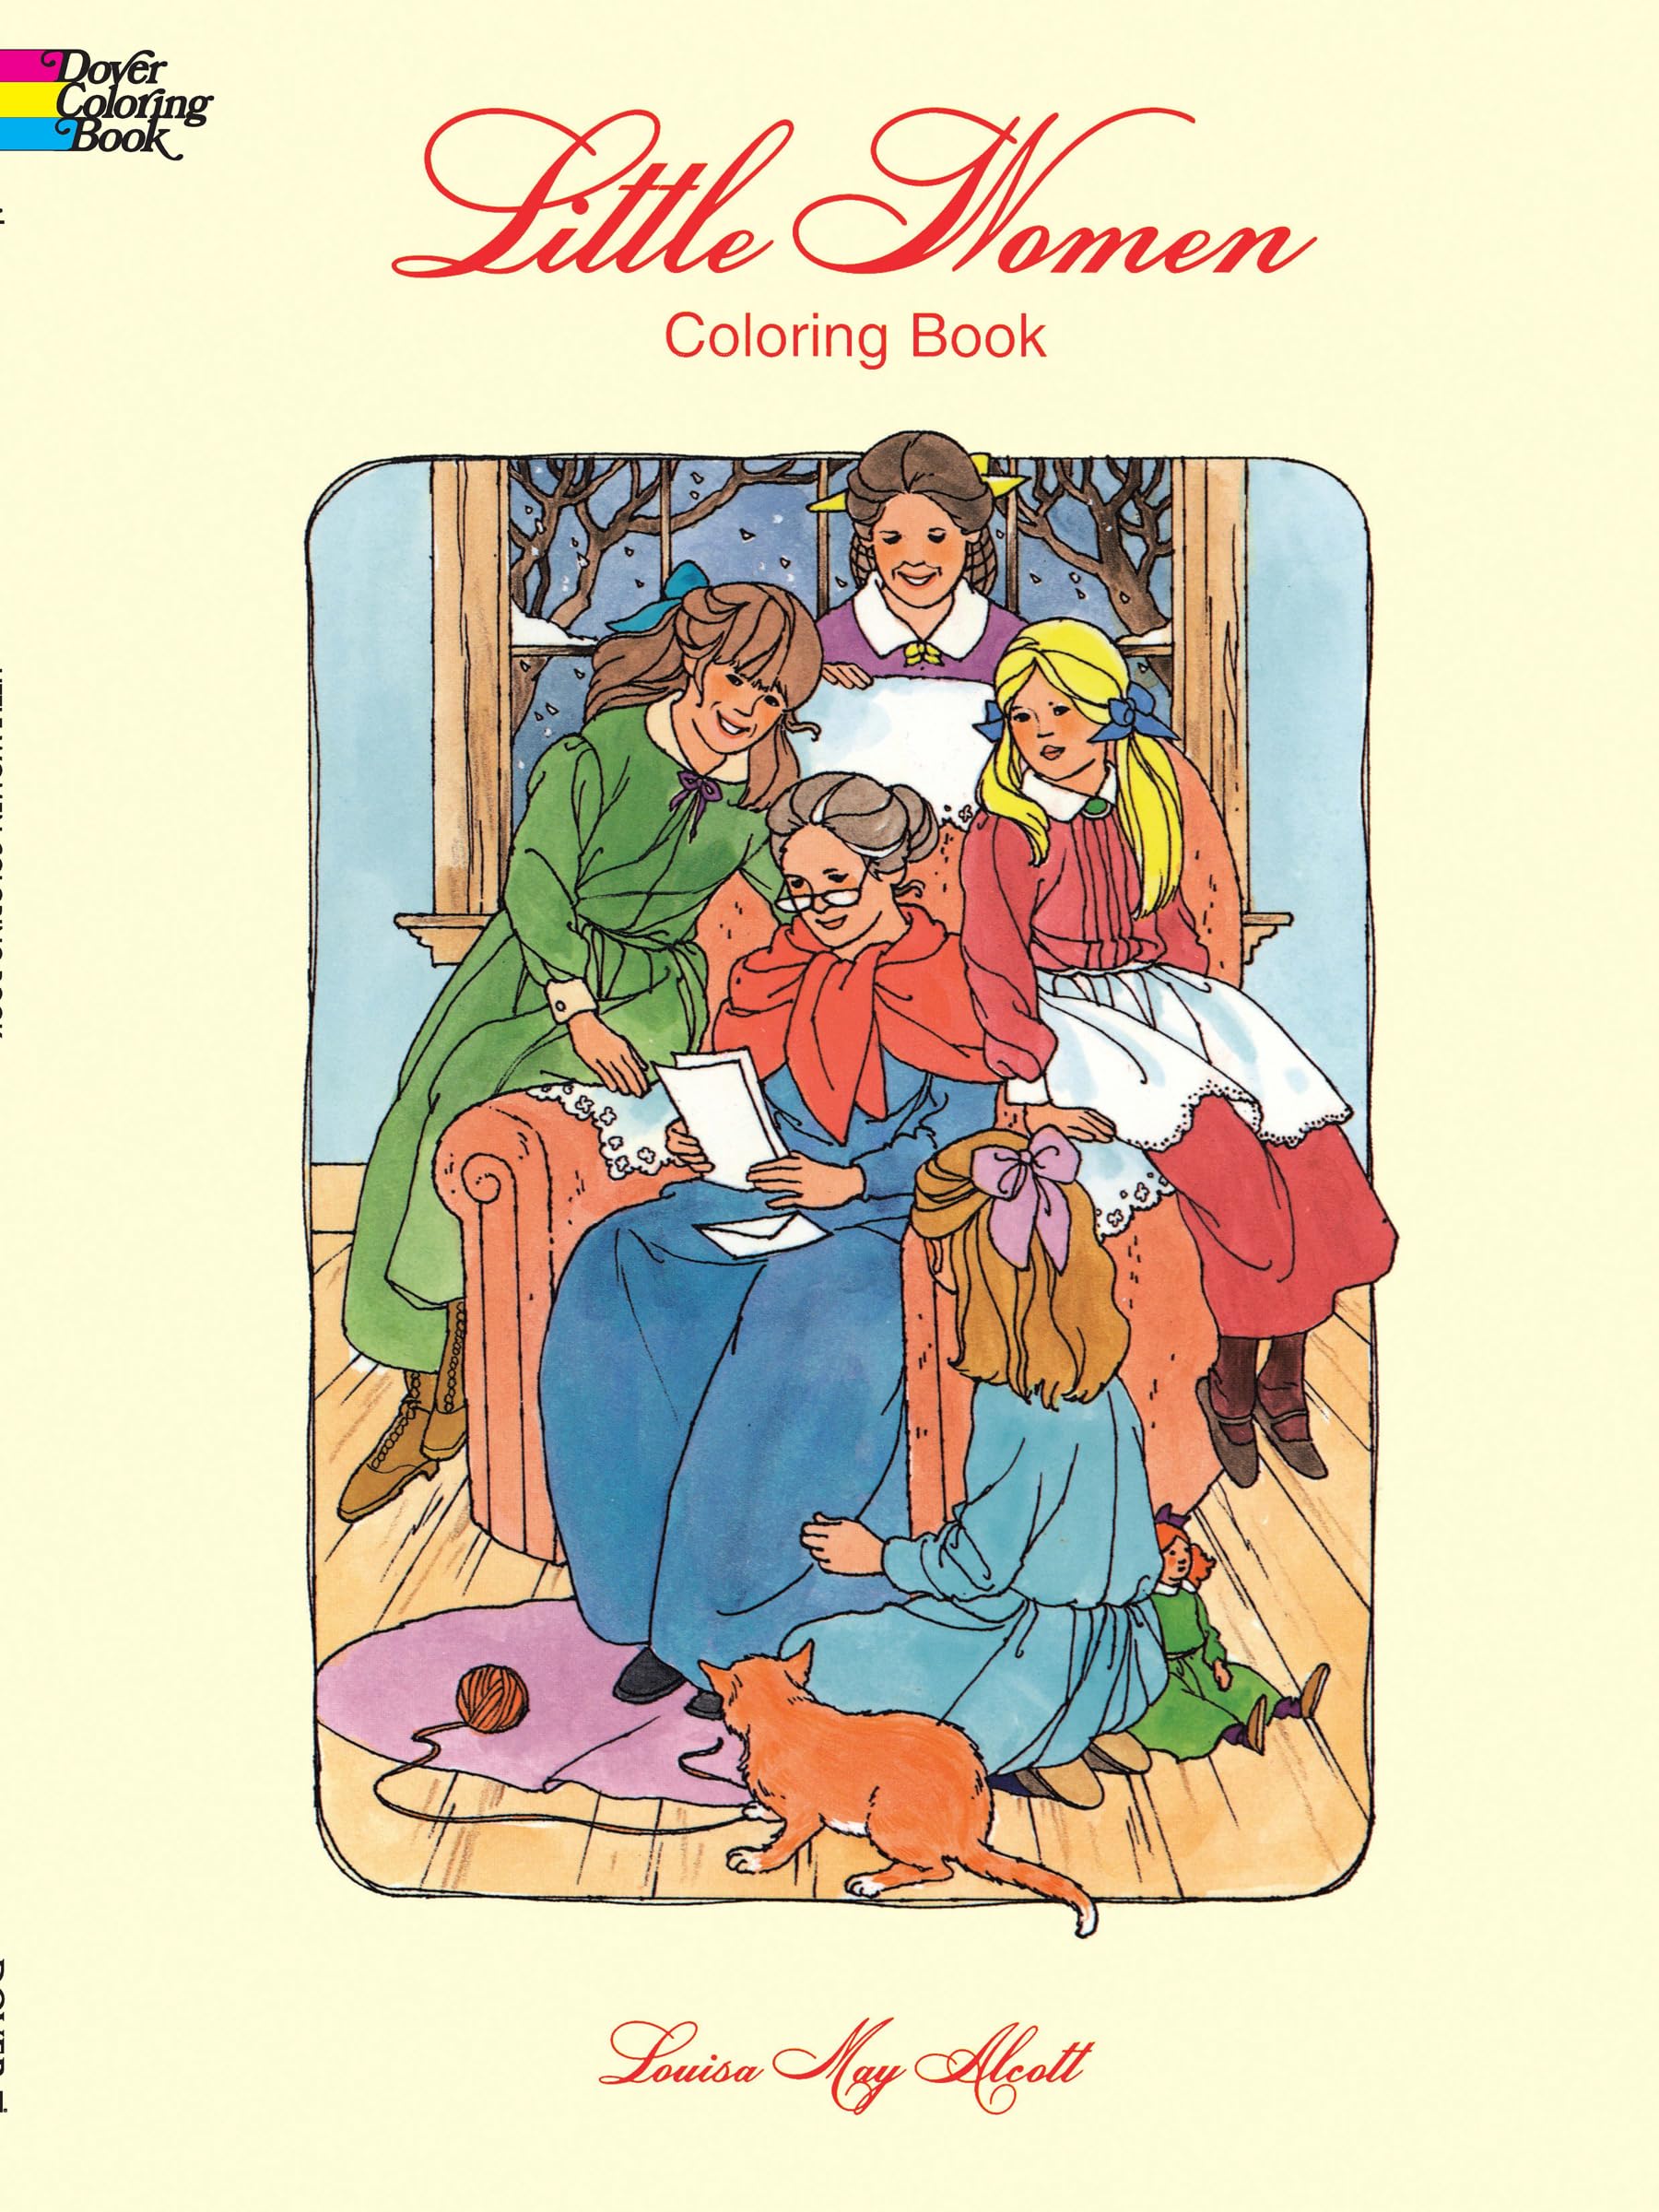 Little Women Coloring Book (Dover Classic Stories Coloring Book)